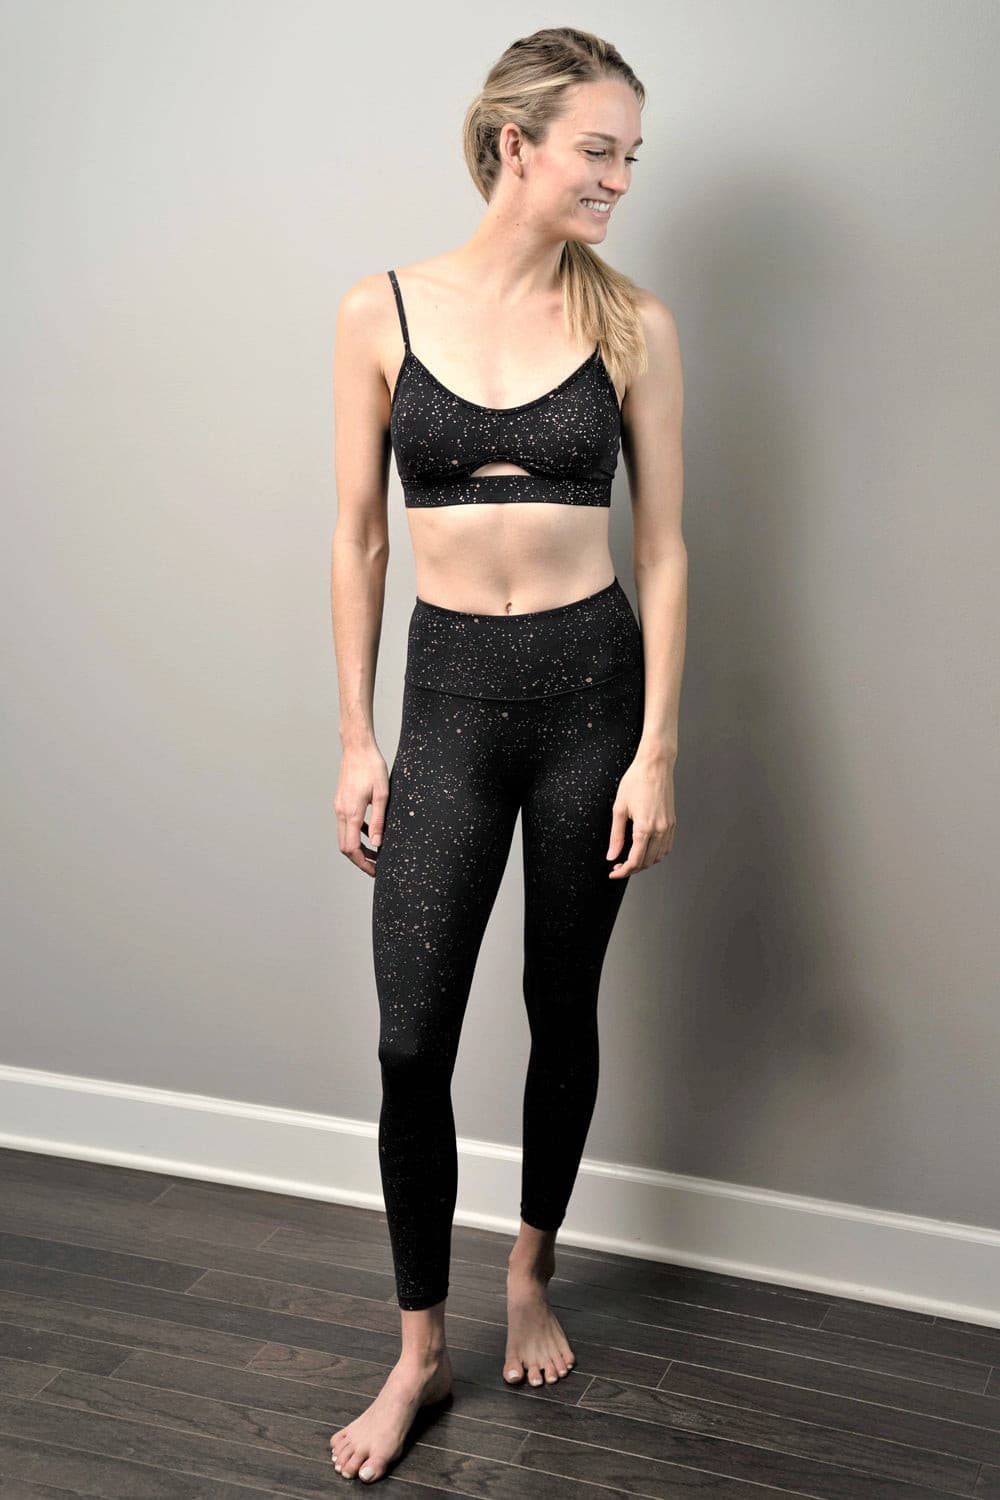 Sparkle Activewear A Southern Drawl, 55% OFF